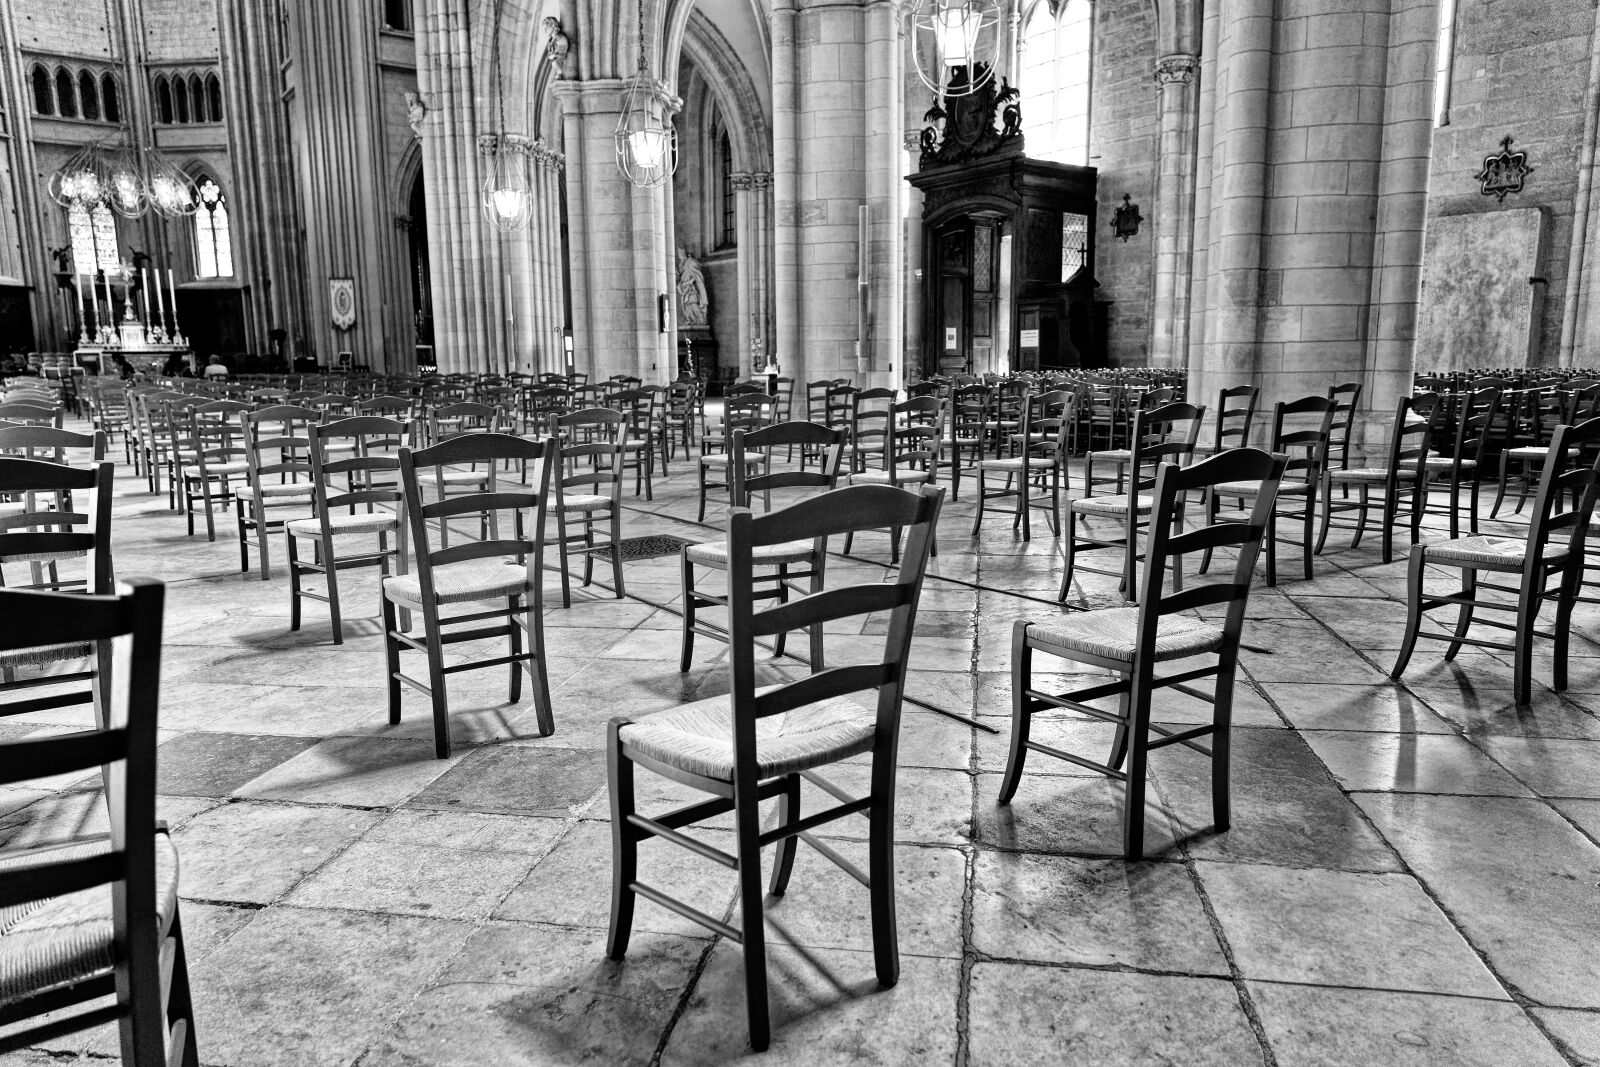 Sony a7 II + Sony FE 24-105mm F4 G OSS sample photo. Church, chair, architecture photography